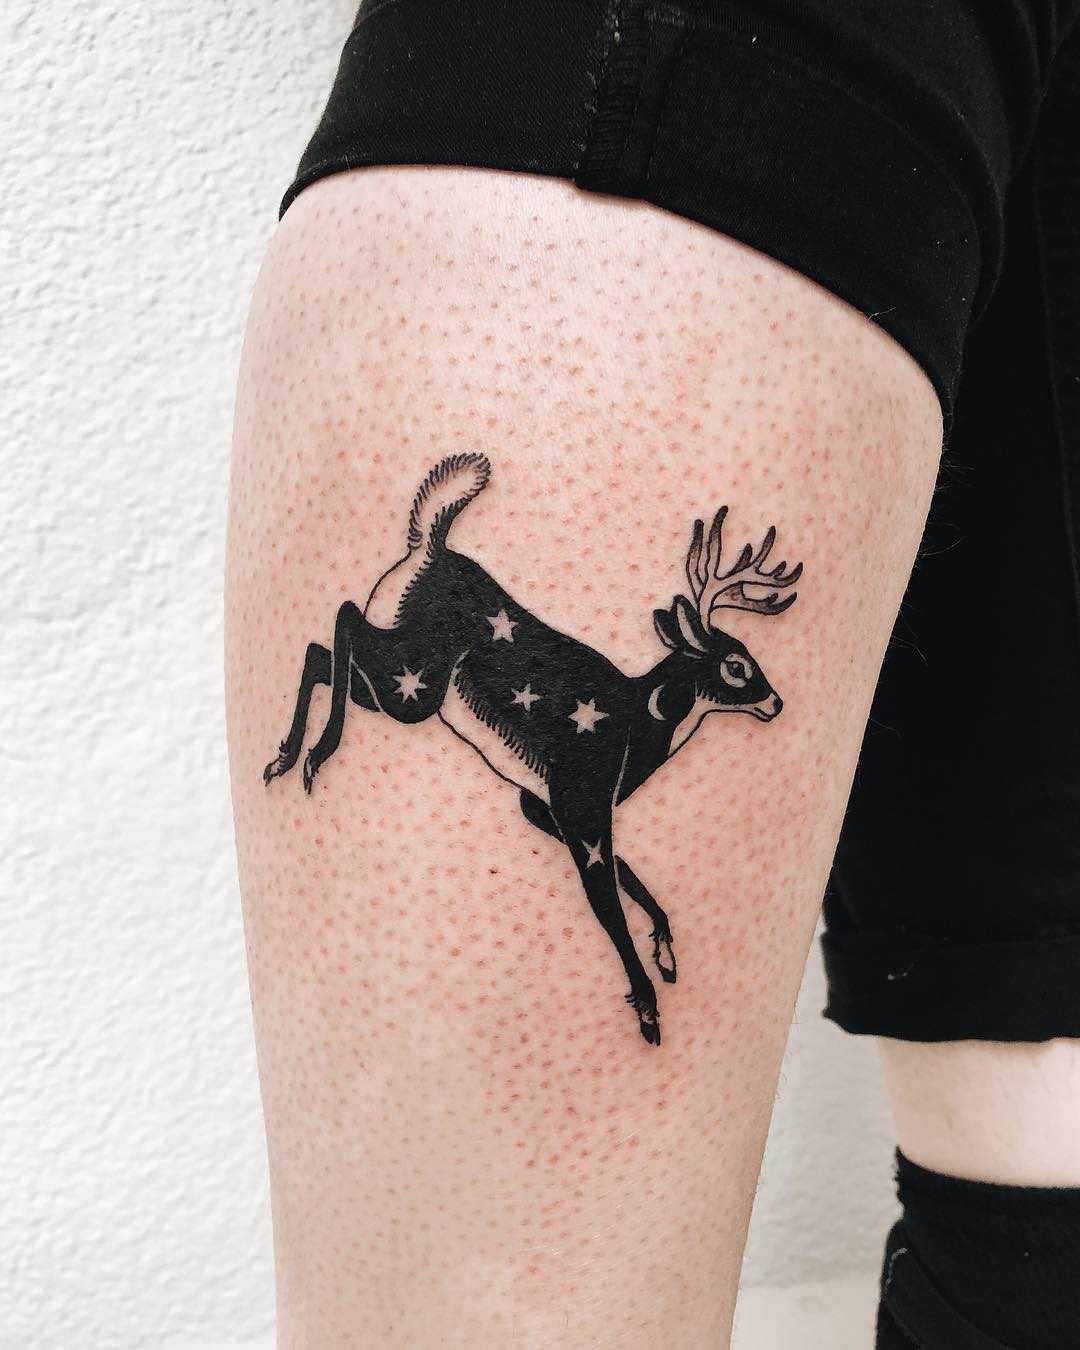 Buy Small Deer Tattoo Online In India - Etsy India